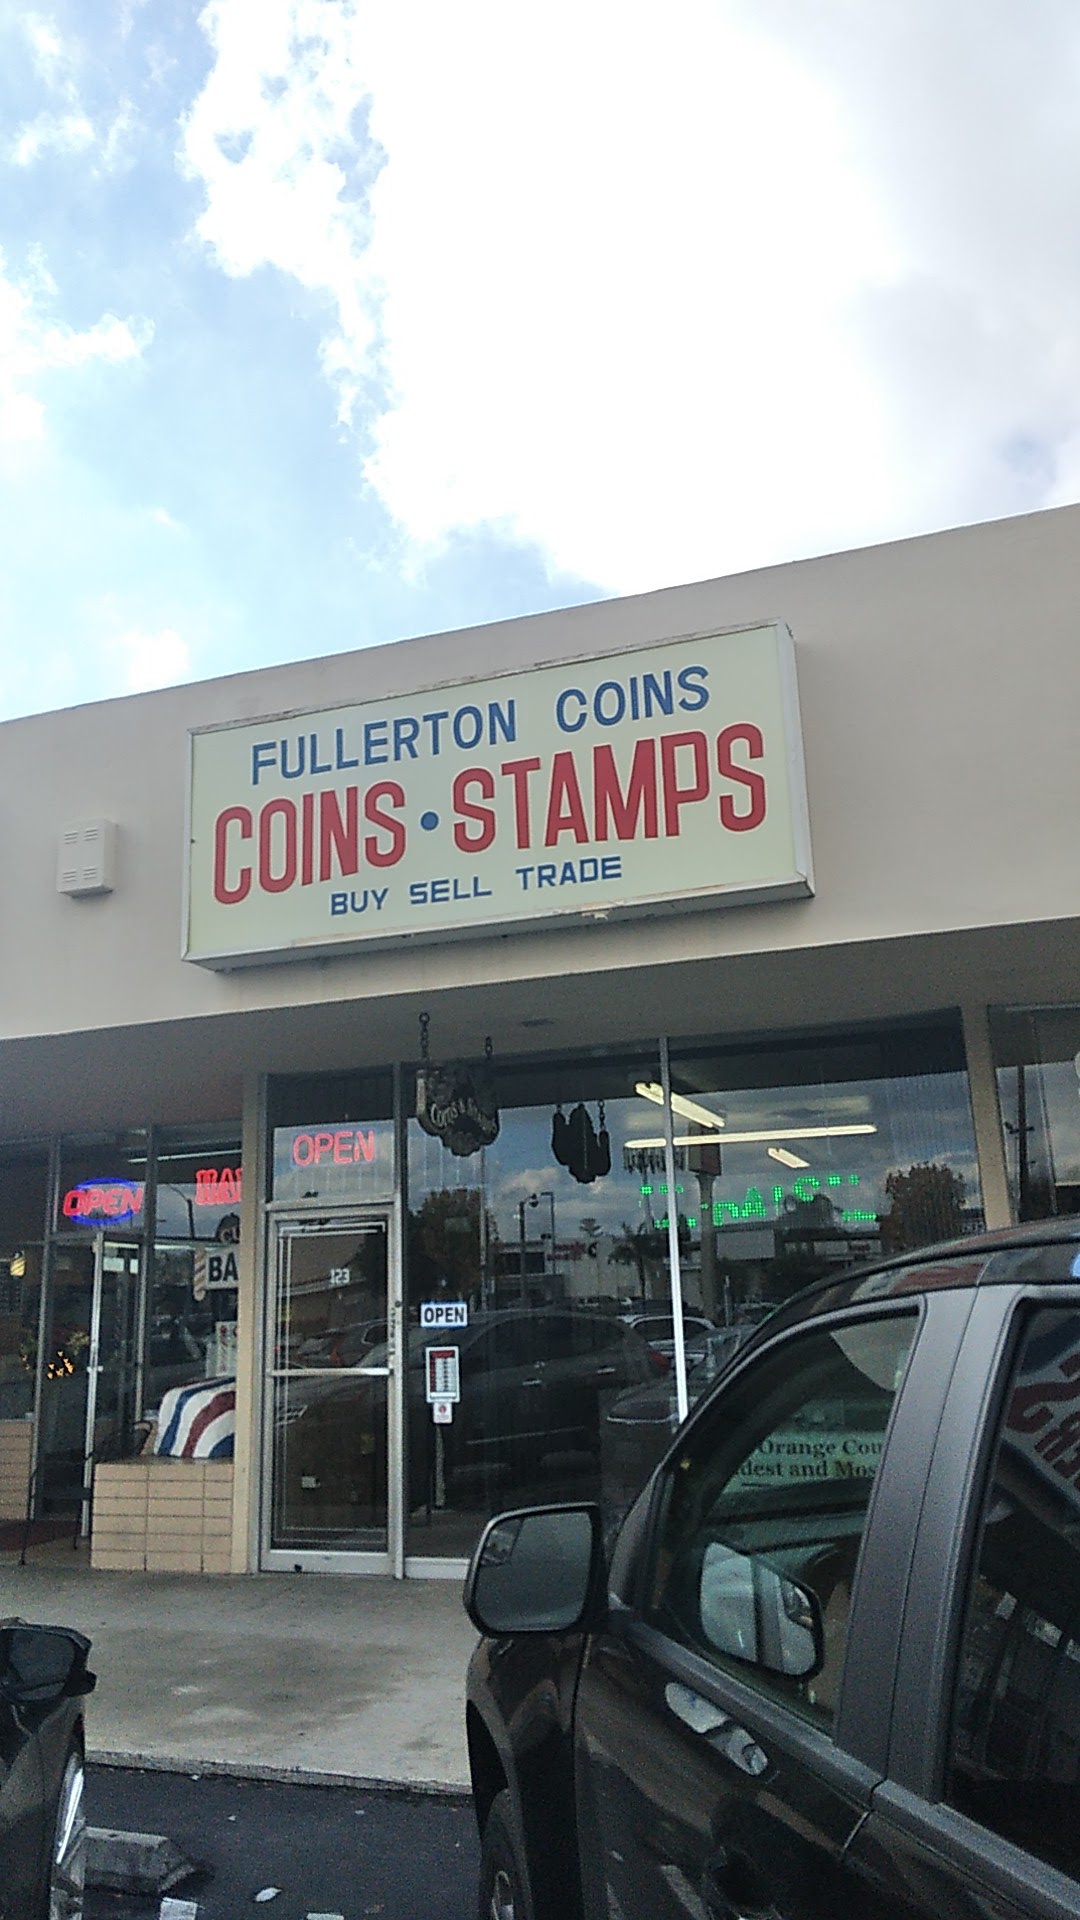 Fullerton Coins & Stamps